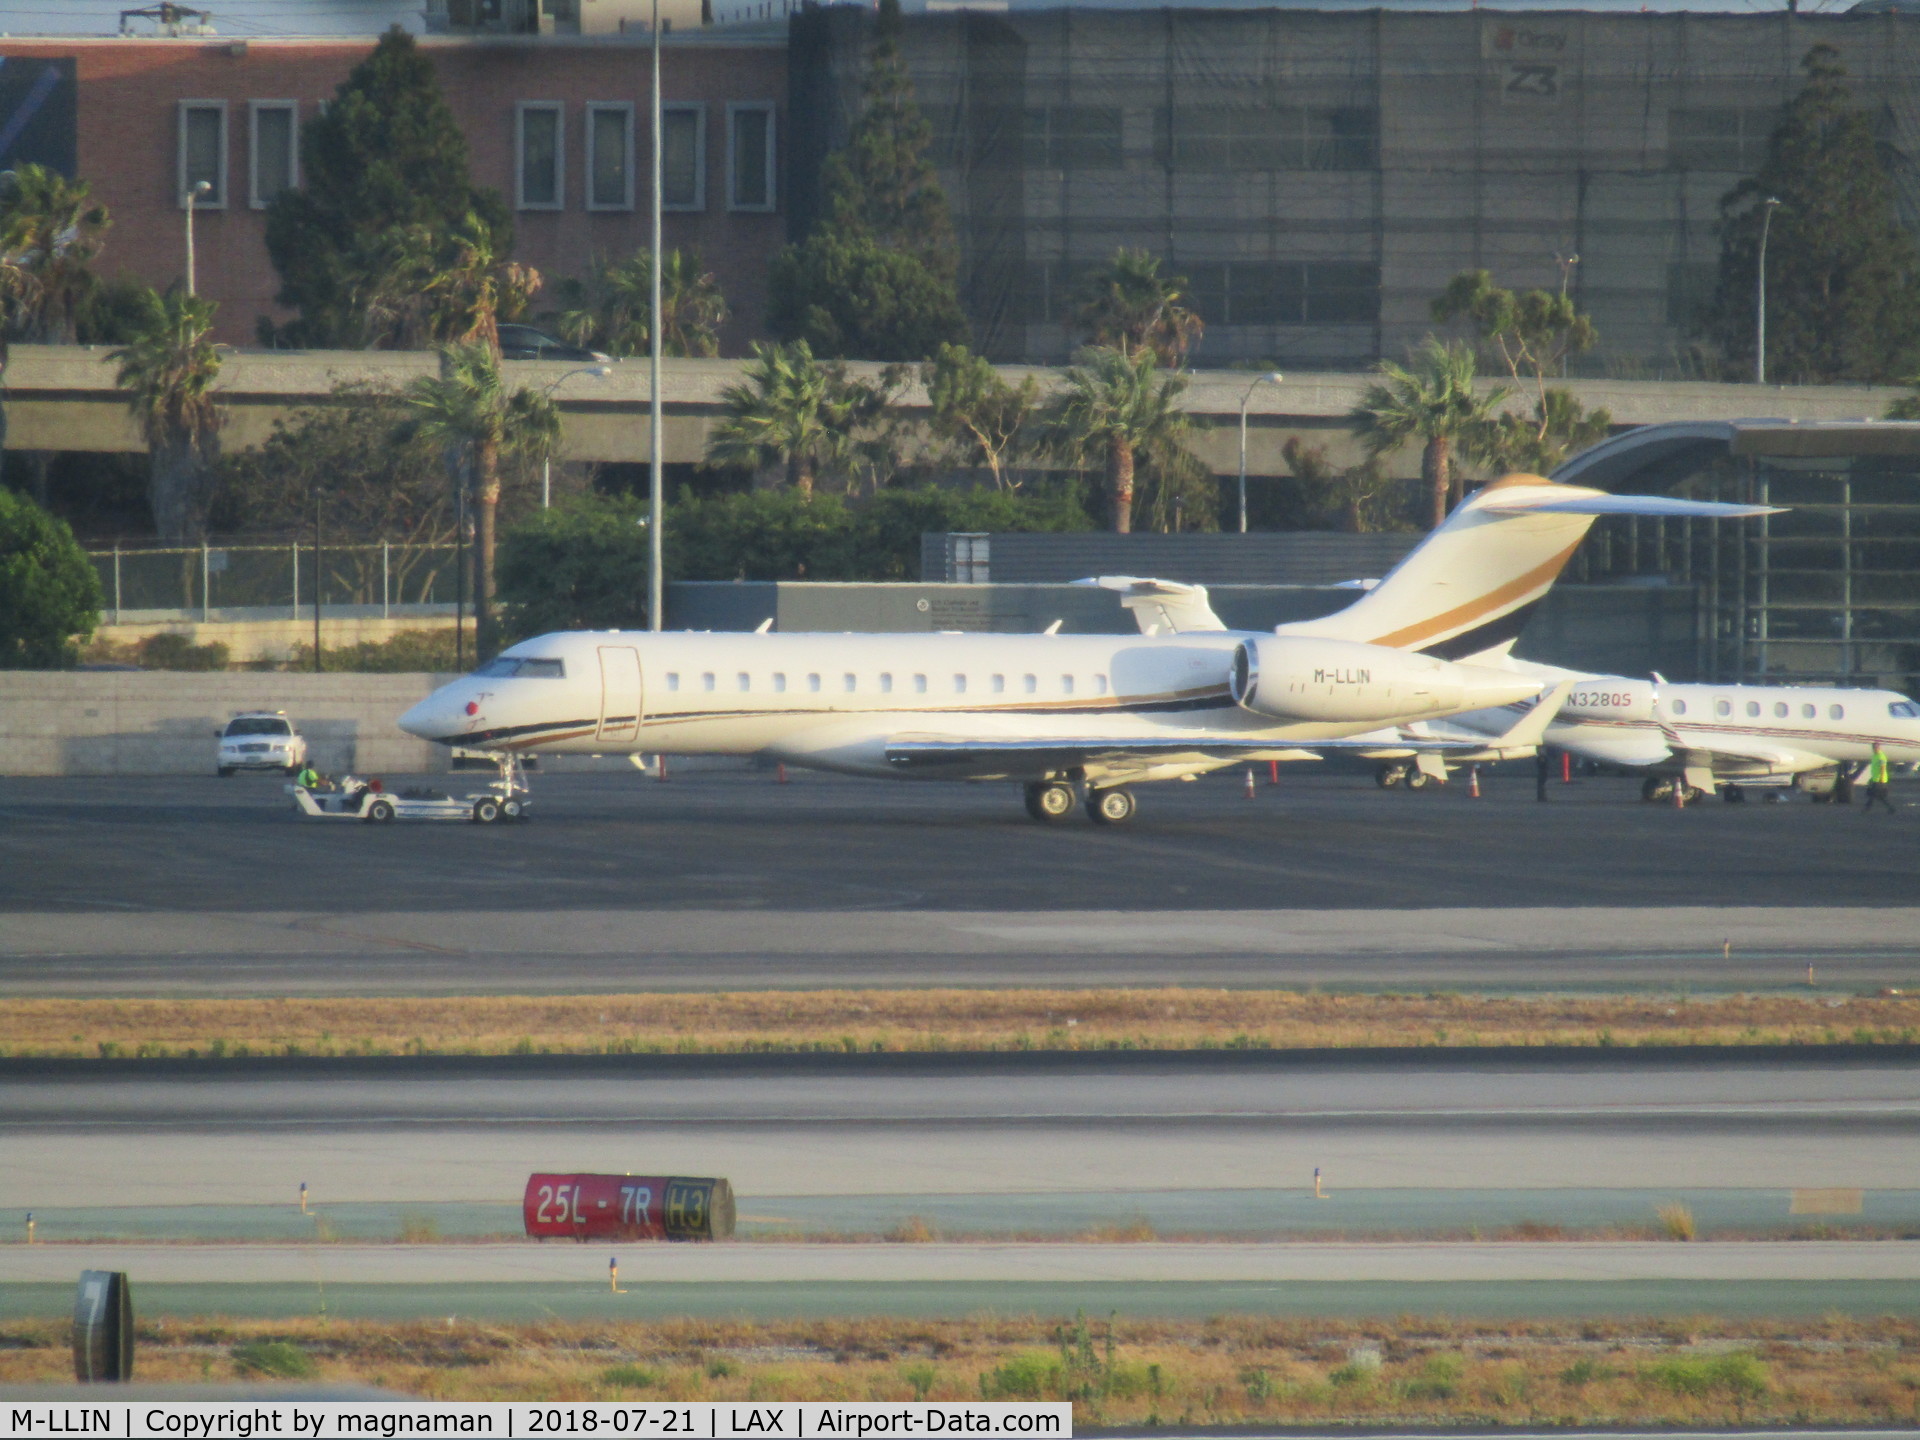 M-LLIN, 2015 Bombardier BD-700-1A10 Global 6000 C/N 9735, being towed to stand